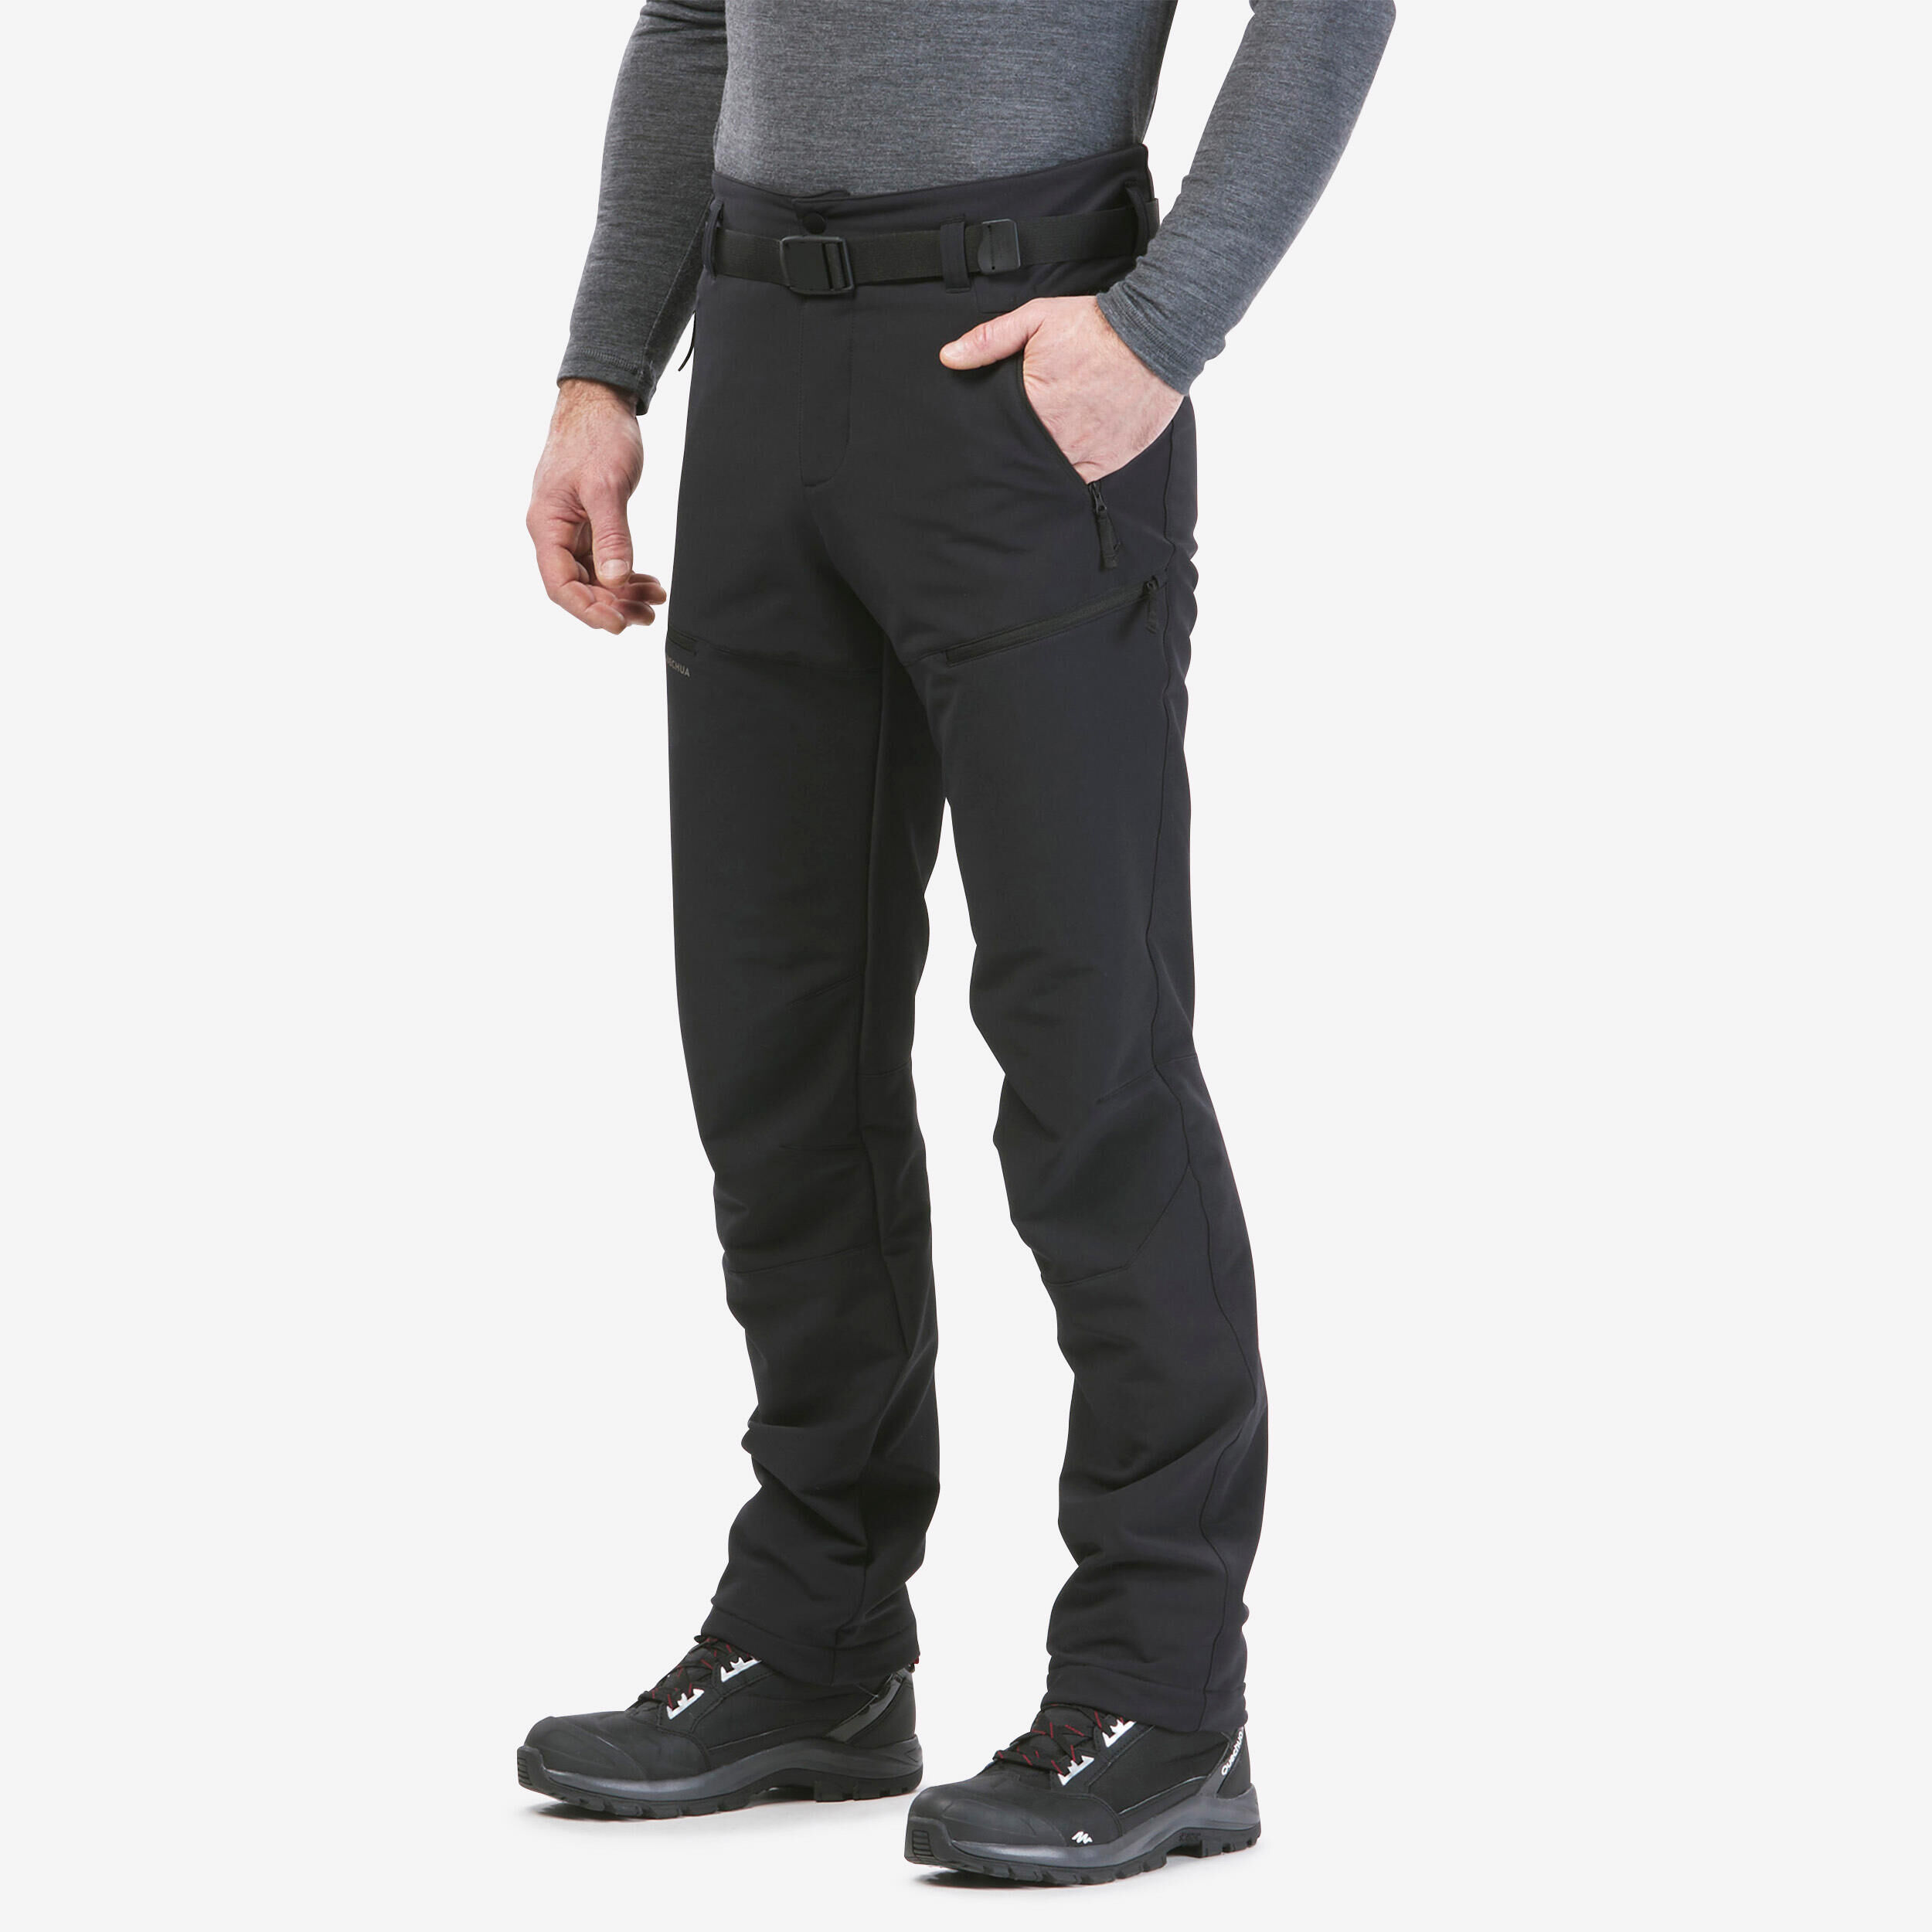 Men's Extreme Thermal Sailing Trousers